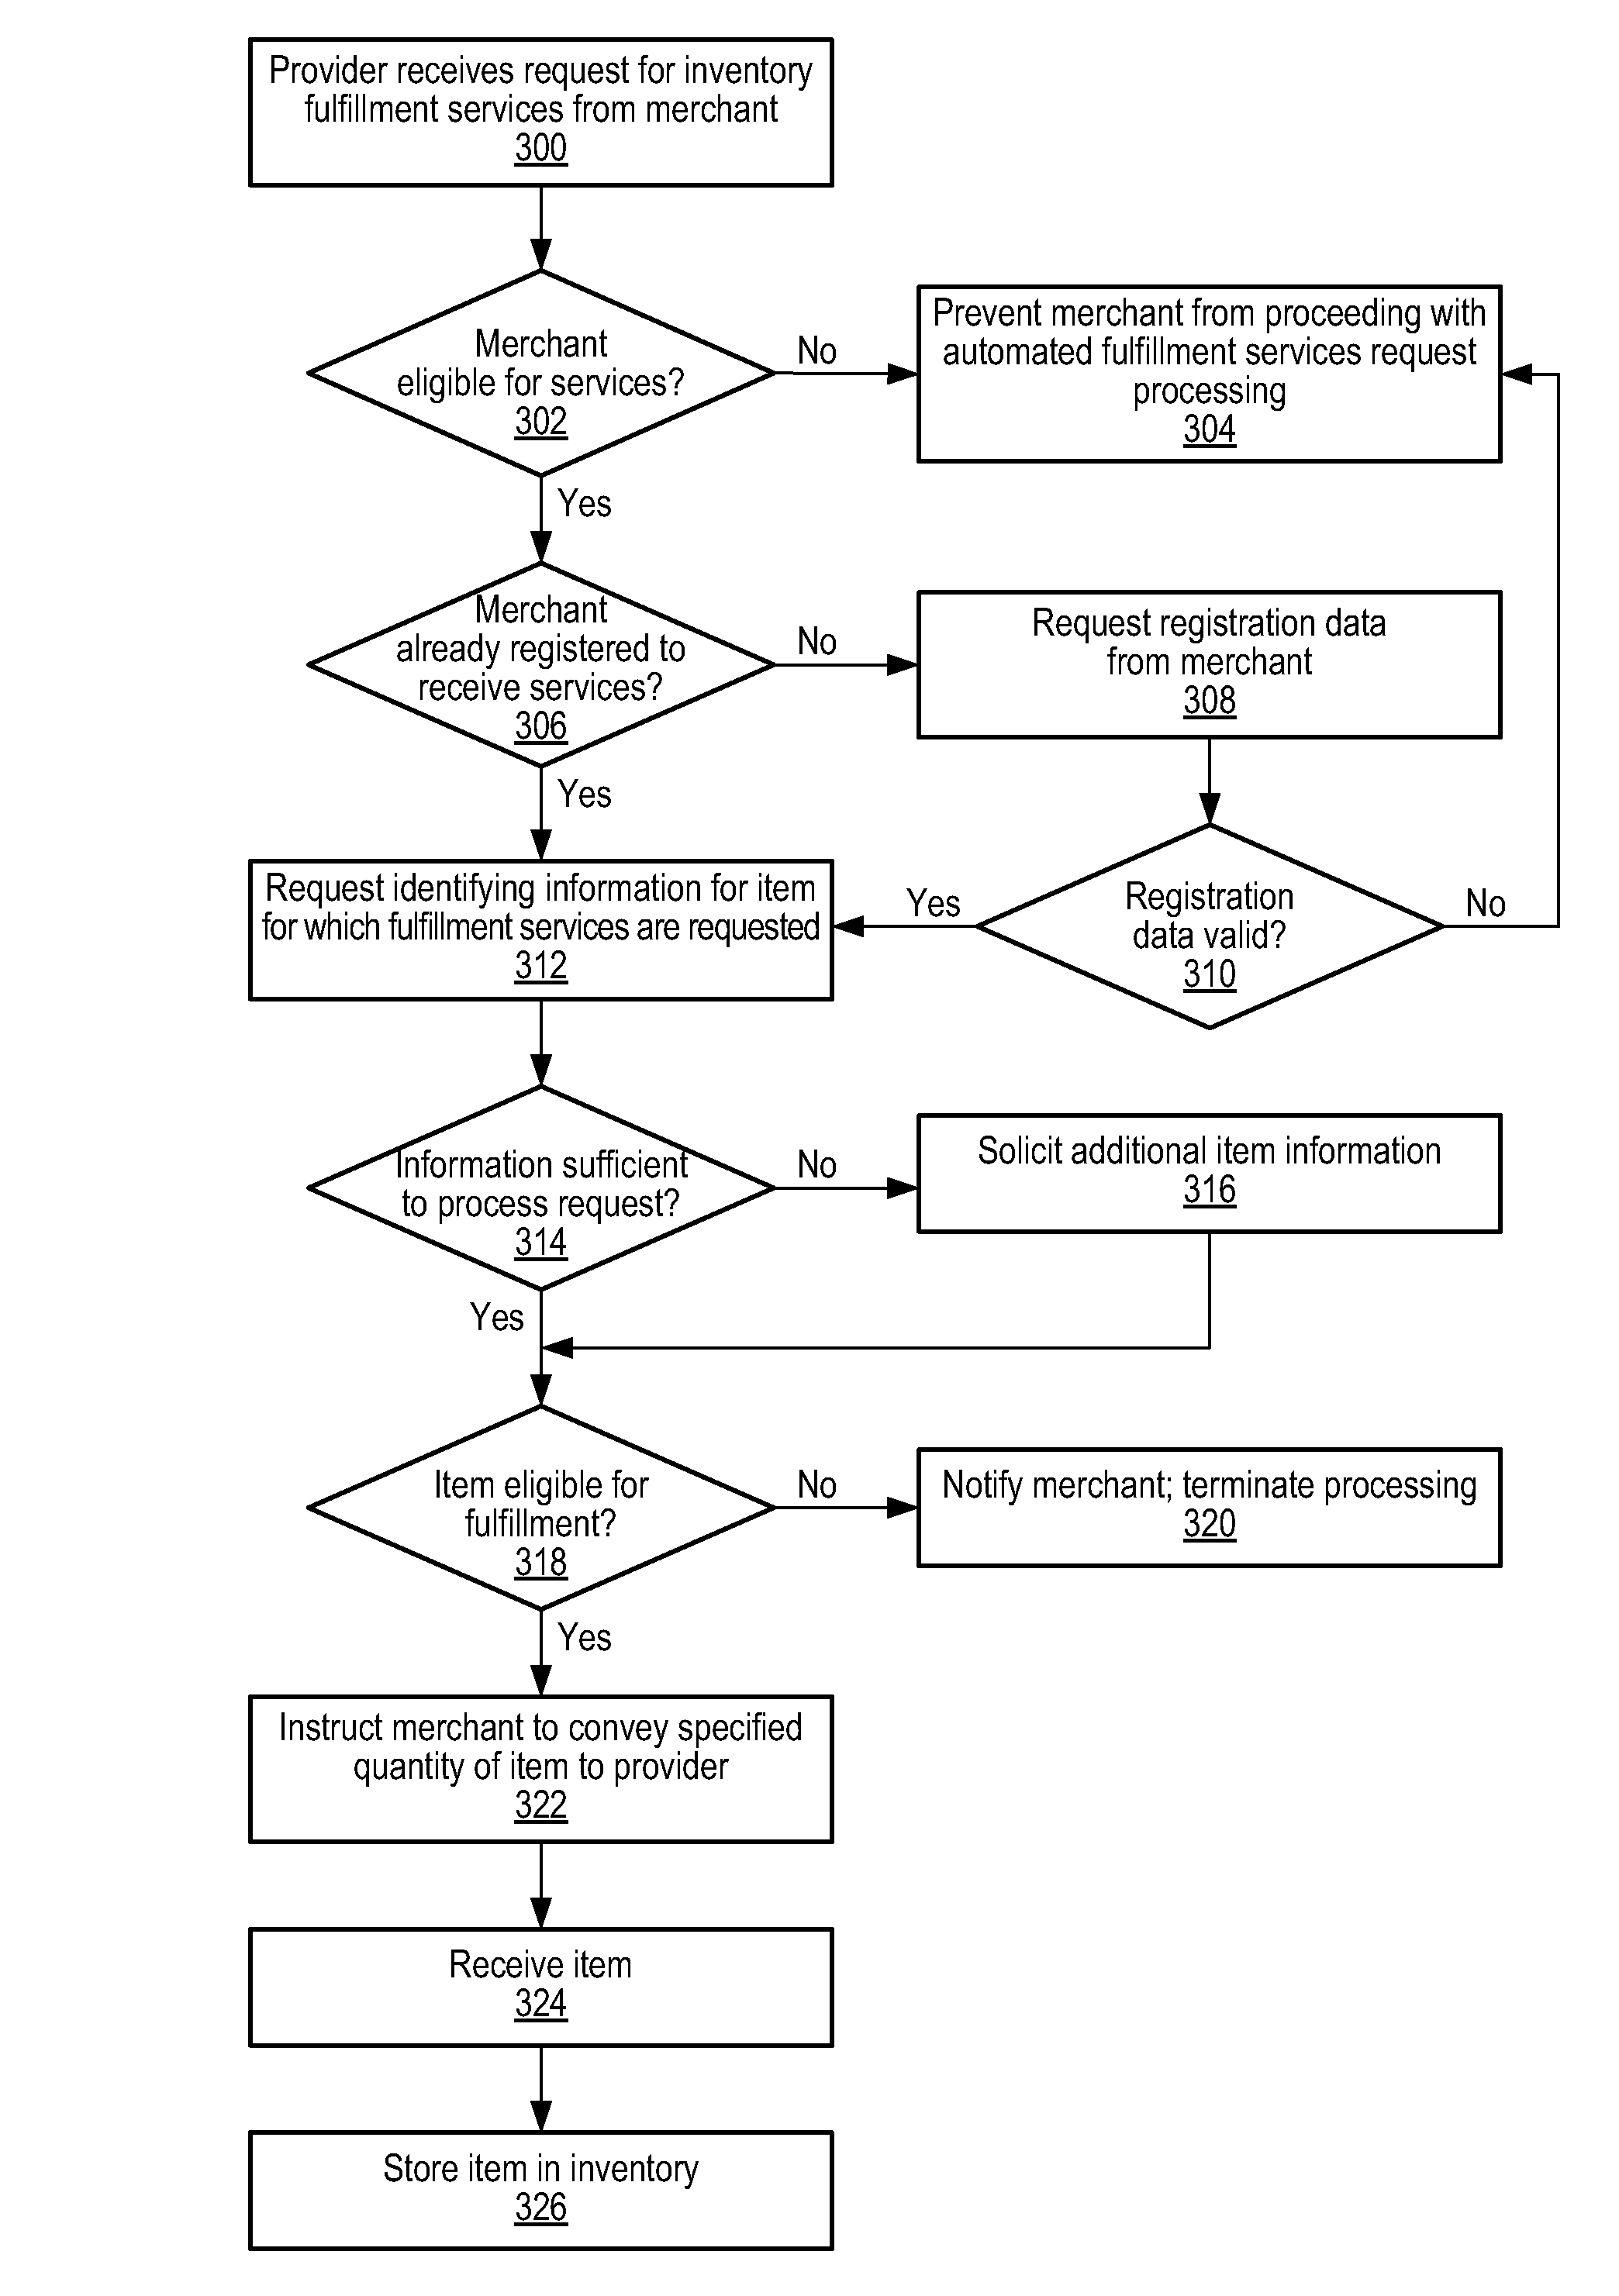 System and method for providing export services to merchants